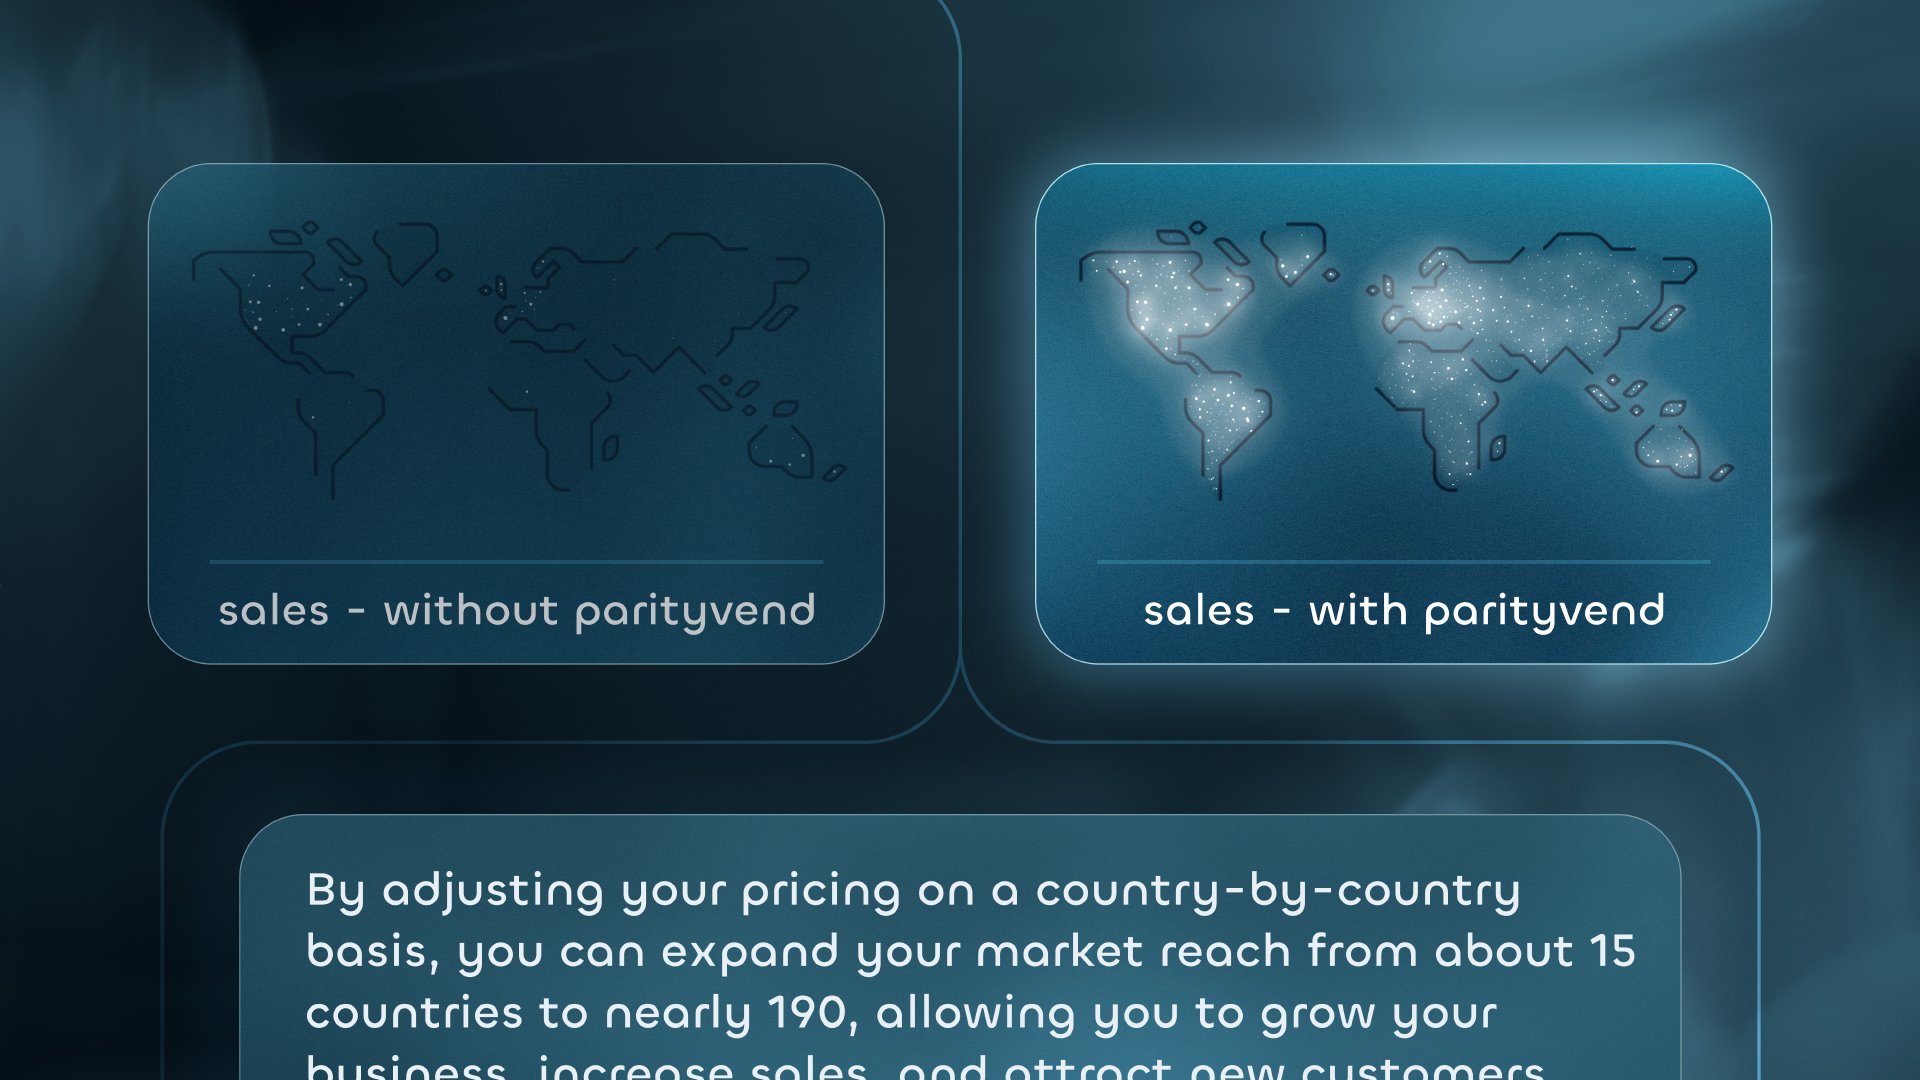 By adjusting your pricing on a country-by-country basis, you can expand your market reach from about 15 countries to nearly 190, allowing you to grow your business and attract new customers.